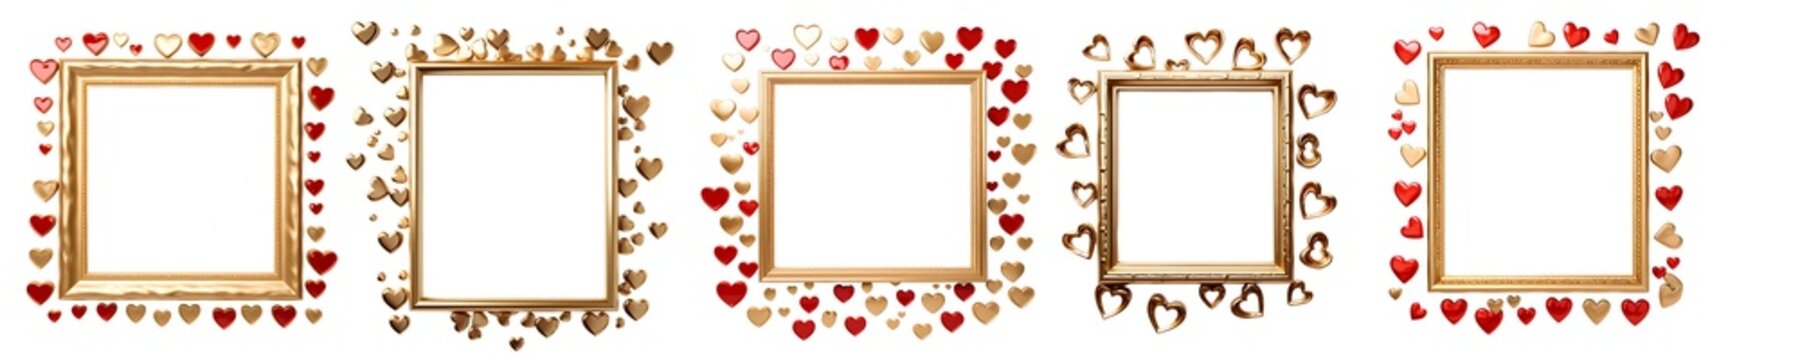 Set of romantic gold picture frame with heart embellishments, perfect for Valentine's Day or wedding announcements